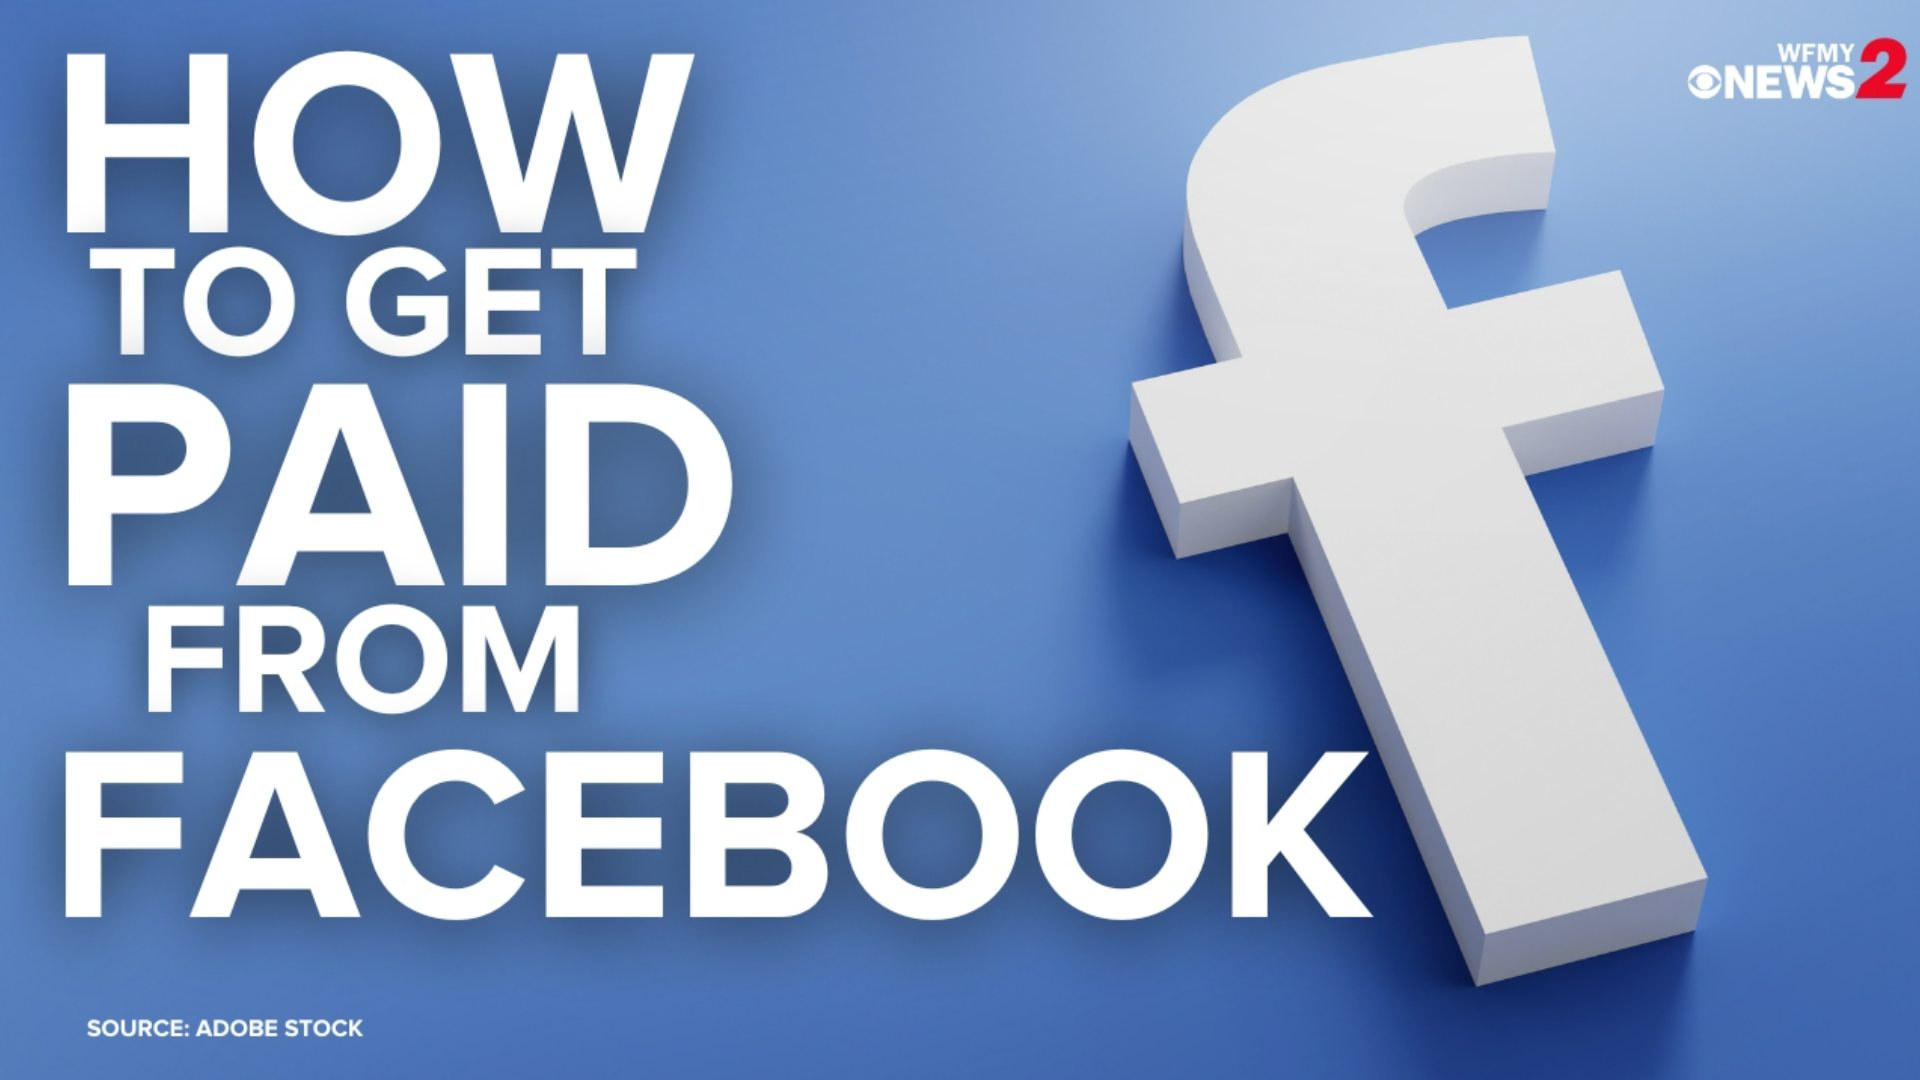 Make your Facebook Settlement claim here and get money